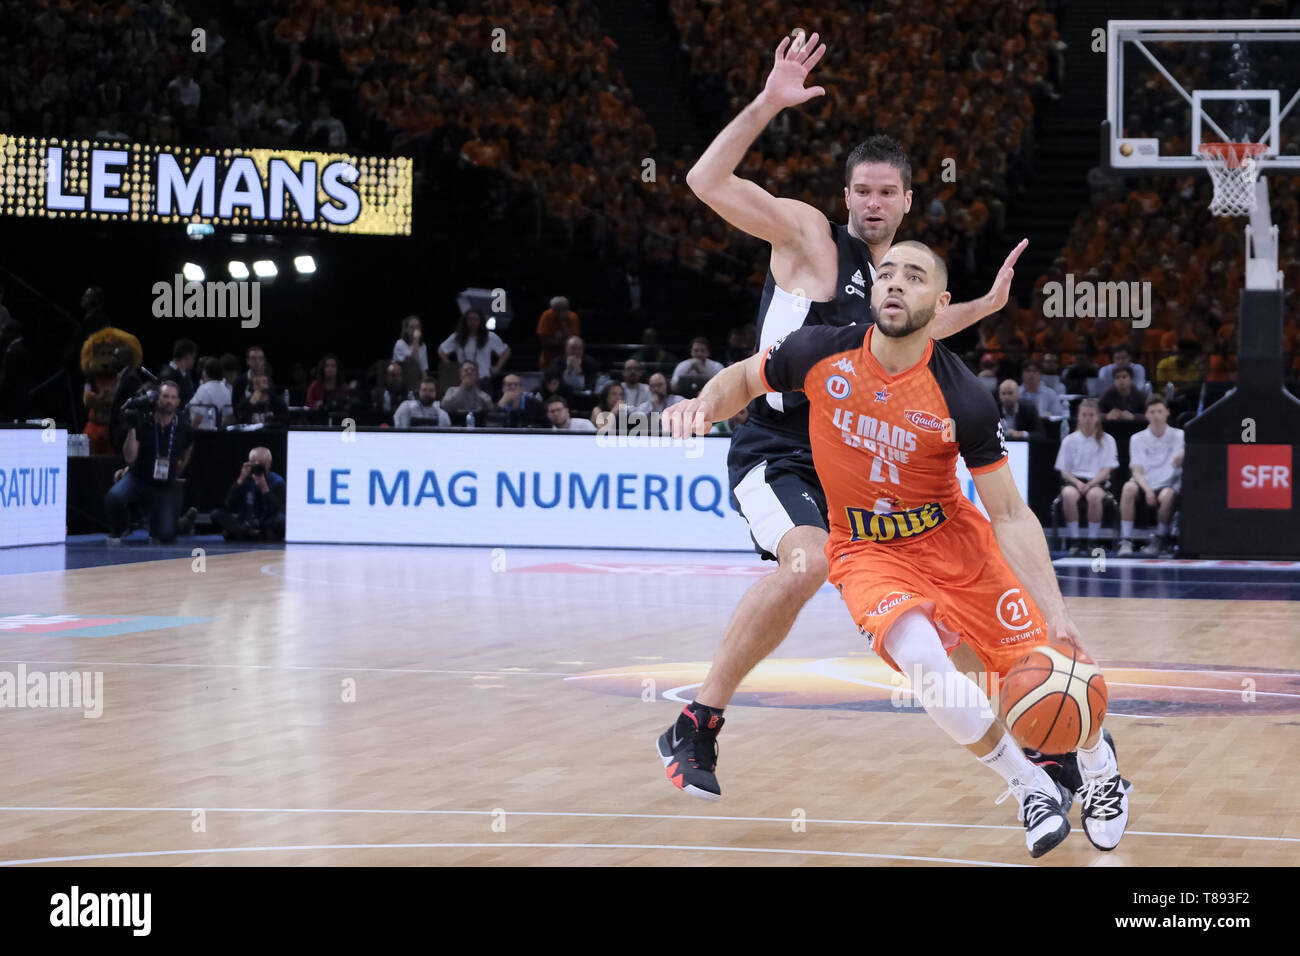 Paris, France. 11th May, 2019. Point Guard of the Le Mans team MICHAEL  THOMPSON in action during the French Cup Basketball Final between ASVEL and  Le Mans at the AccorHotel Arena in